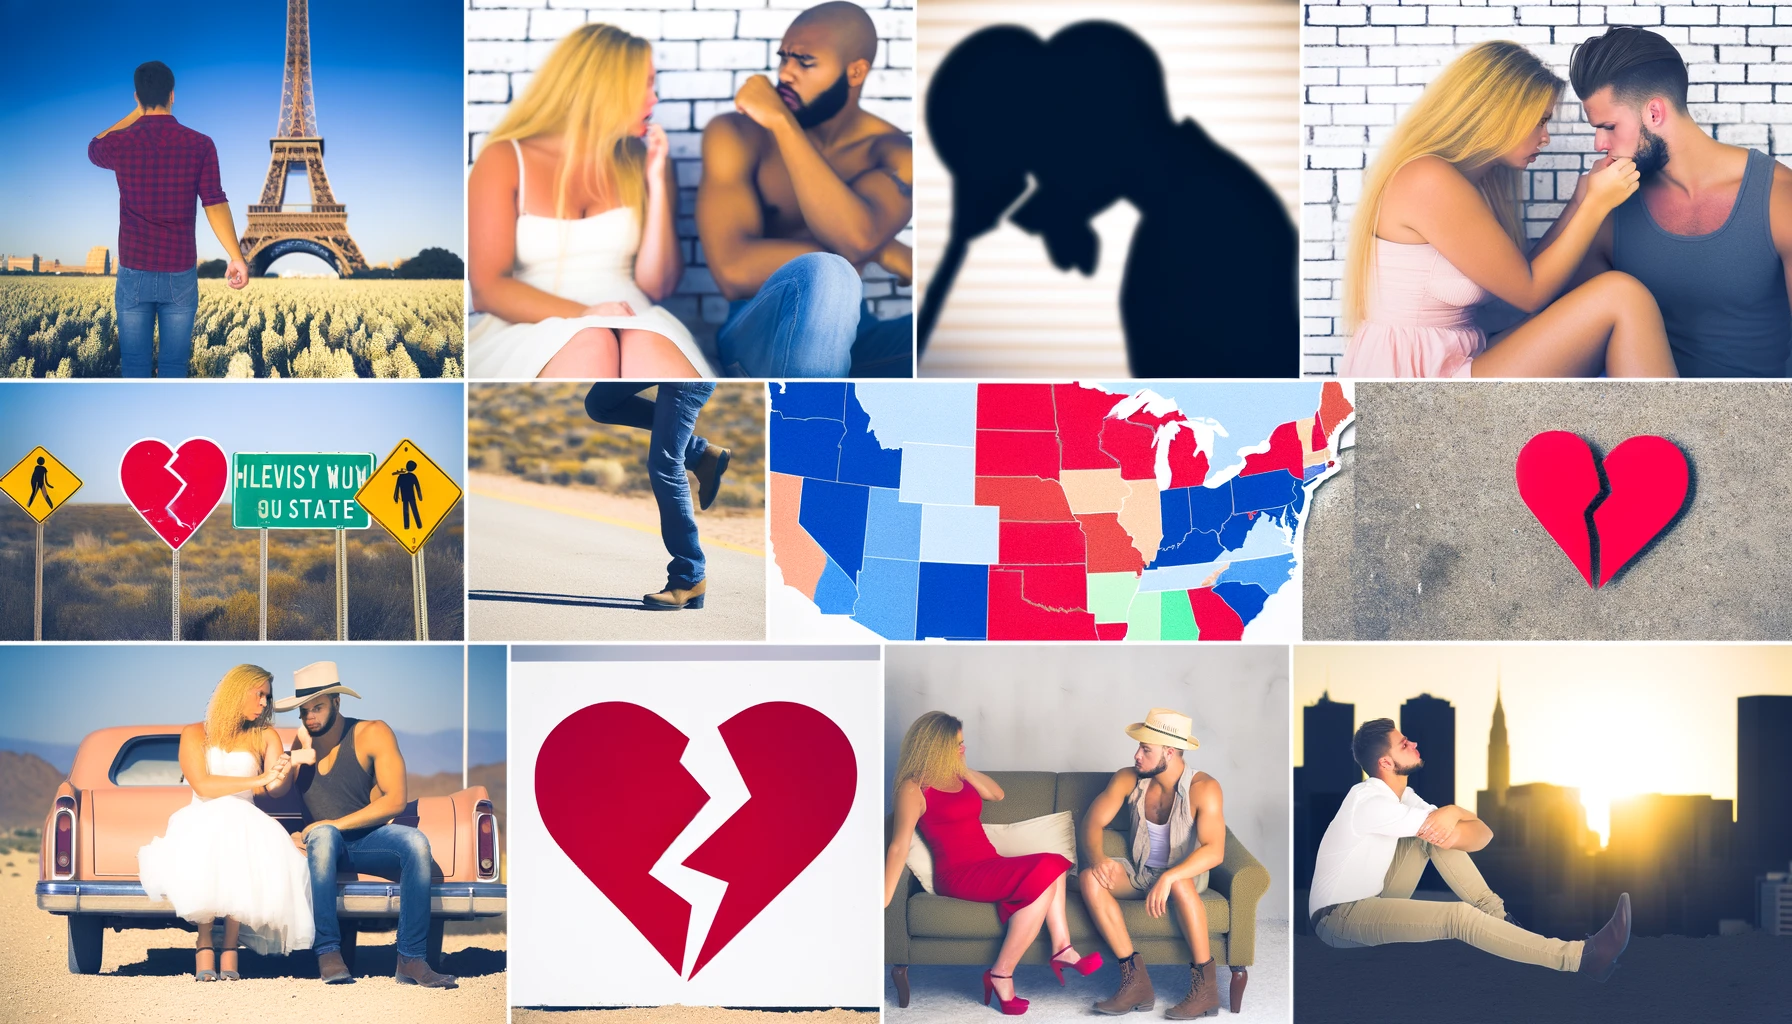 Top 10 Worst States to Find Love